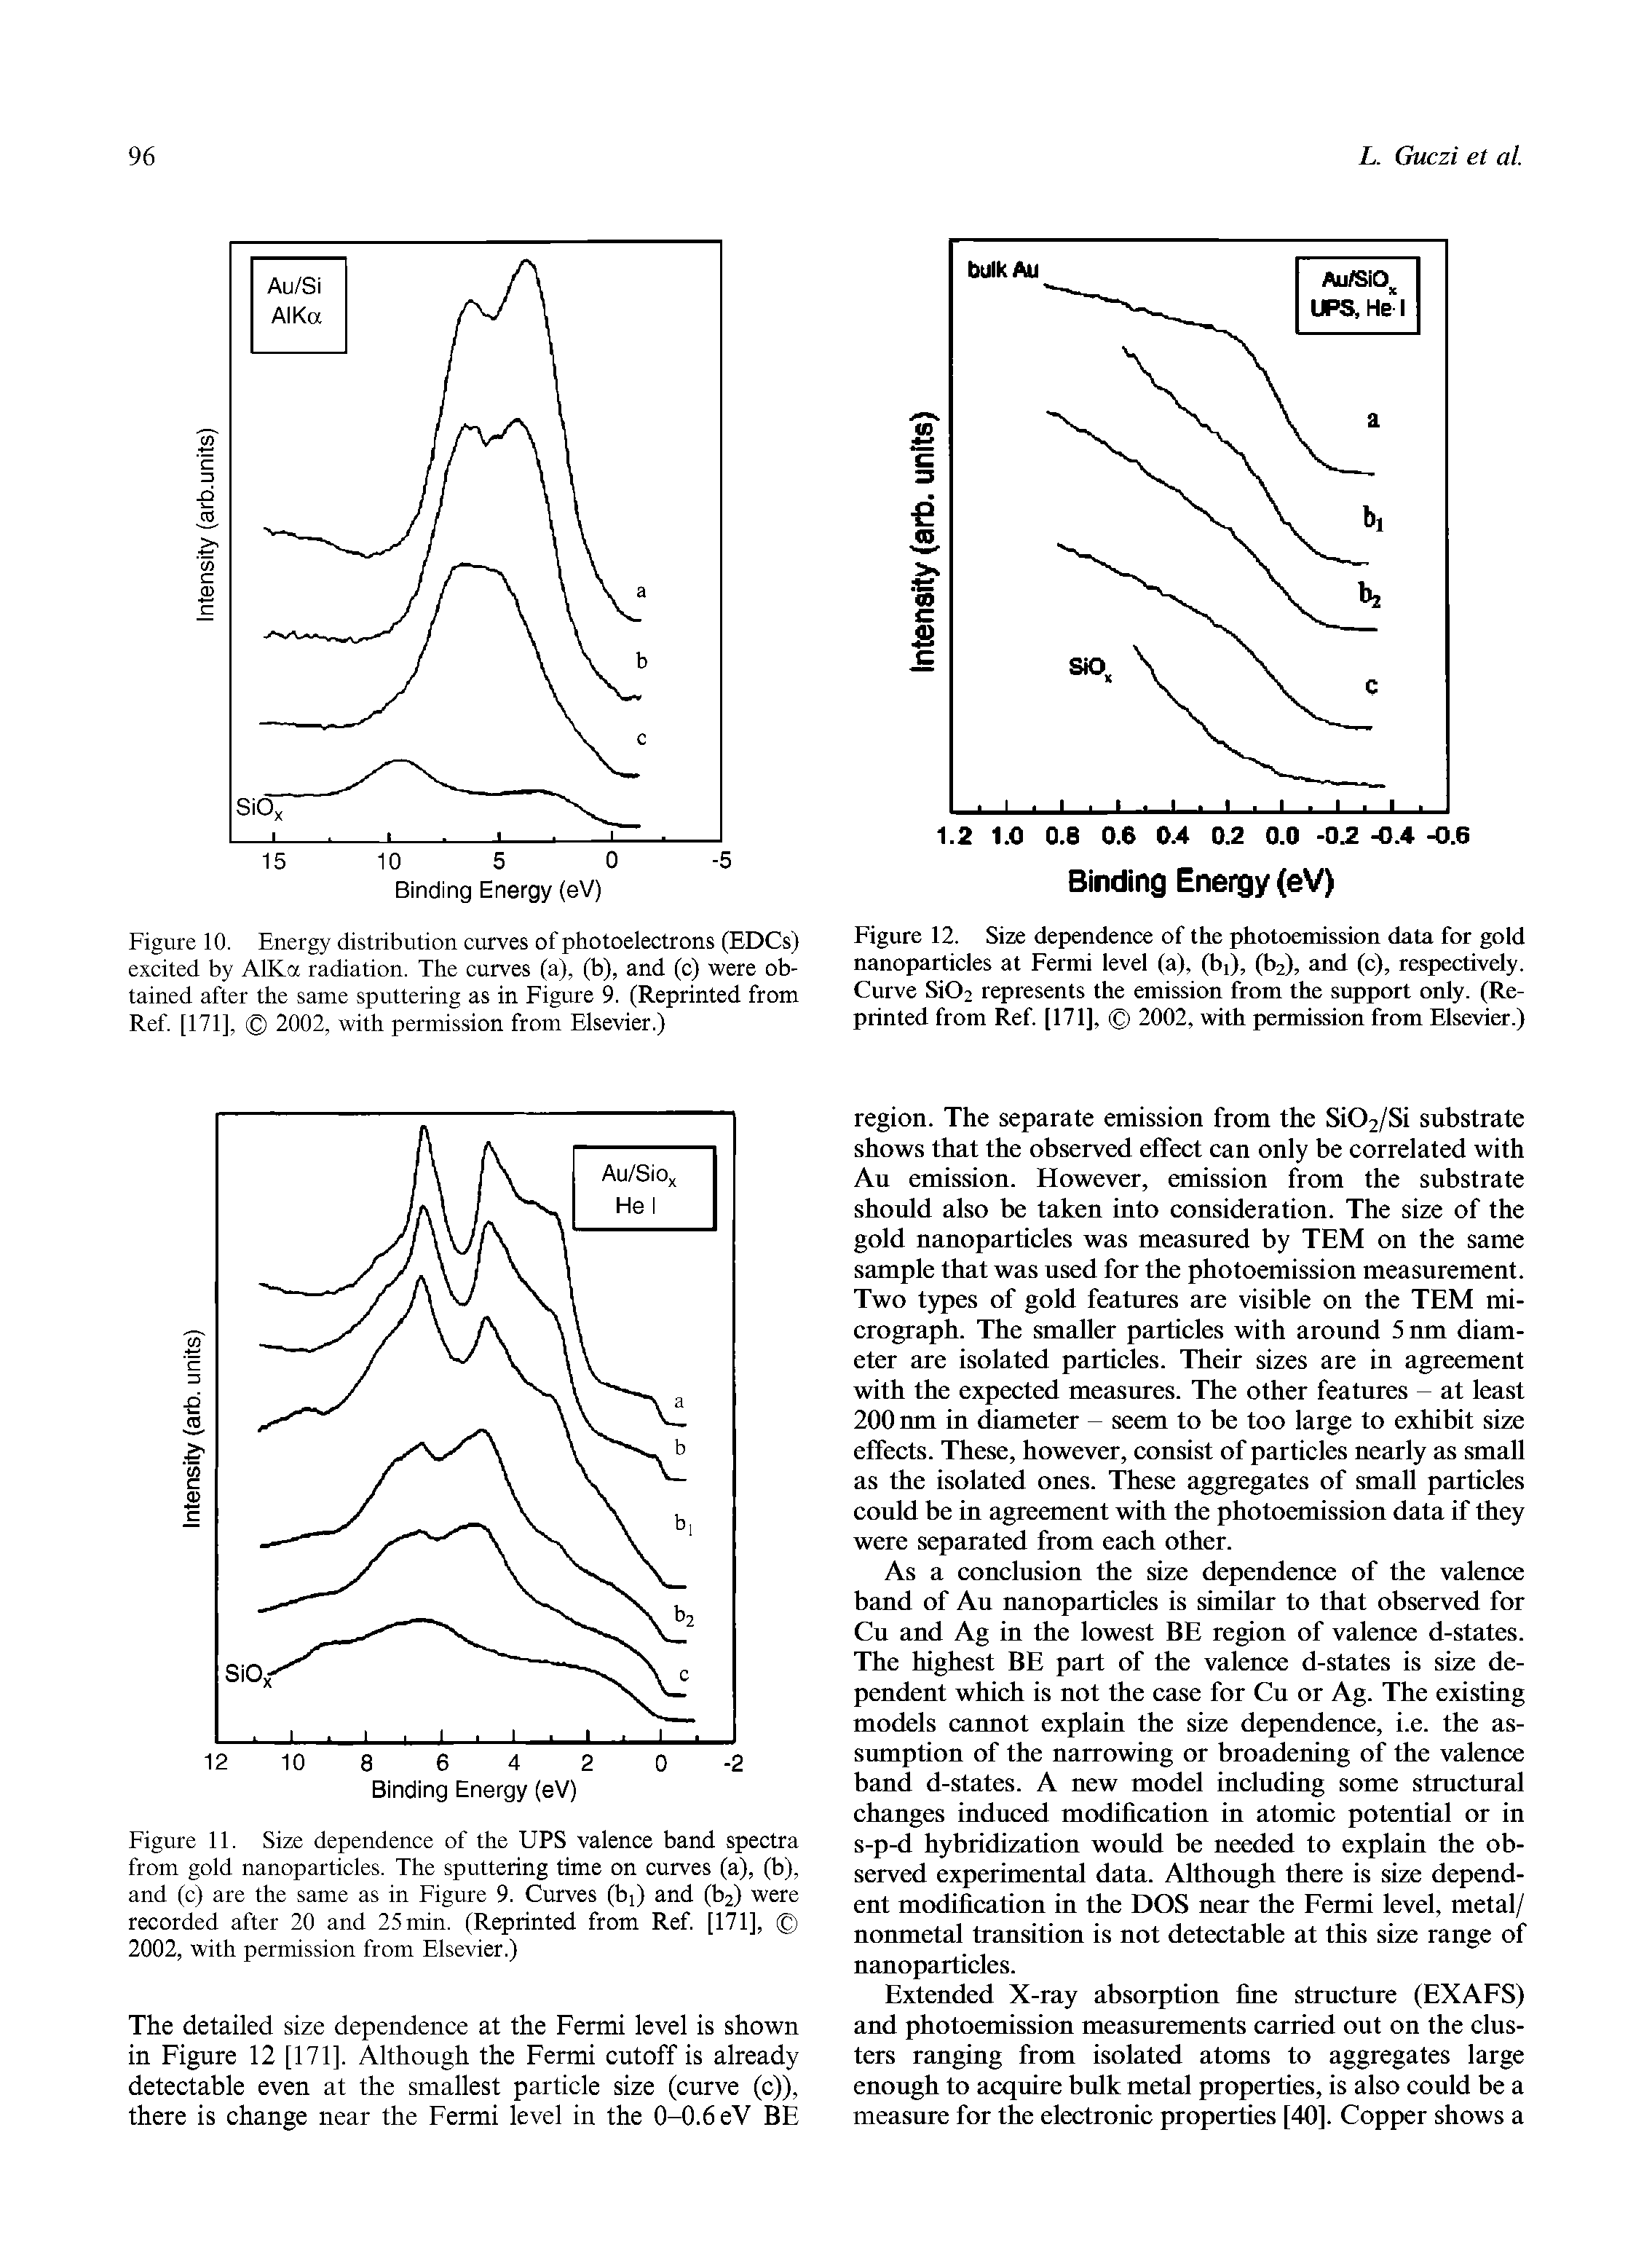 Figure 11. Size dependence of the UPS valence band spectra from gold nanoparticles. The sputtering time on curves (a), (b), and (c) are the same as in Figure 9. Curves (bi) and (b2) were recorded after 20 and 25min. (Reprinted from Ref [171], 2002, with permission from Elsevier.)...